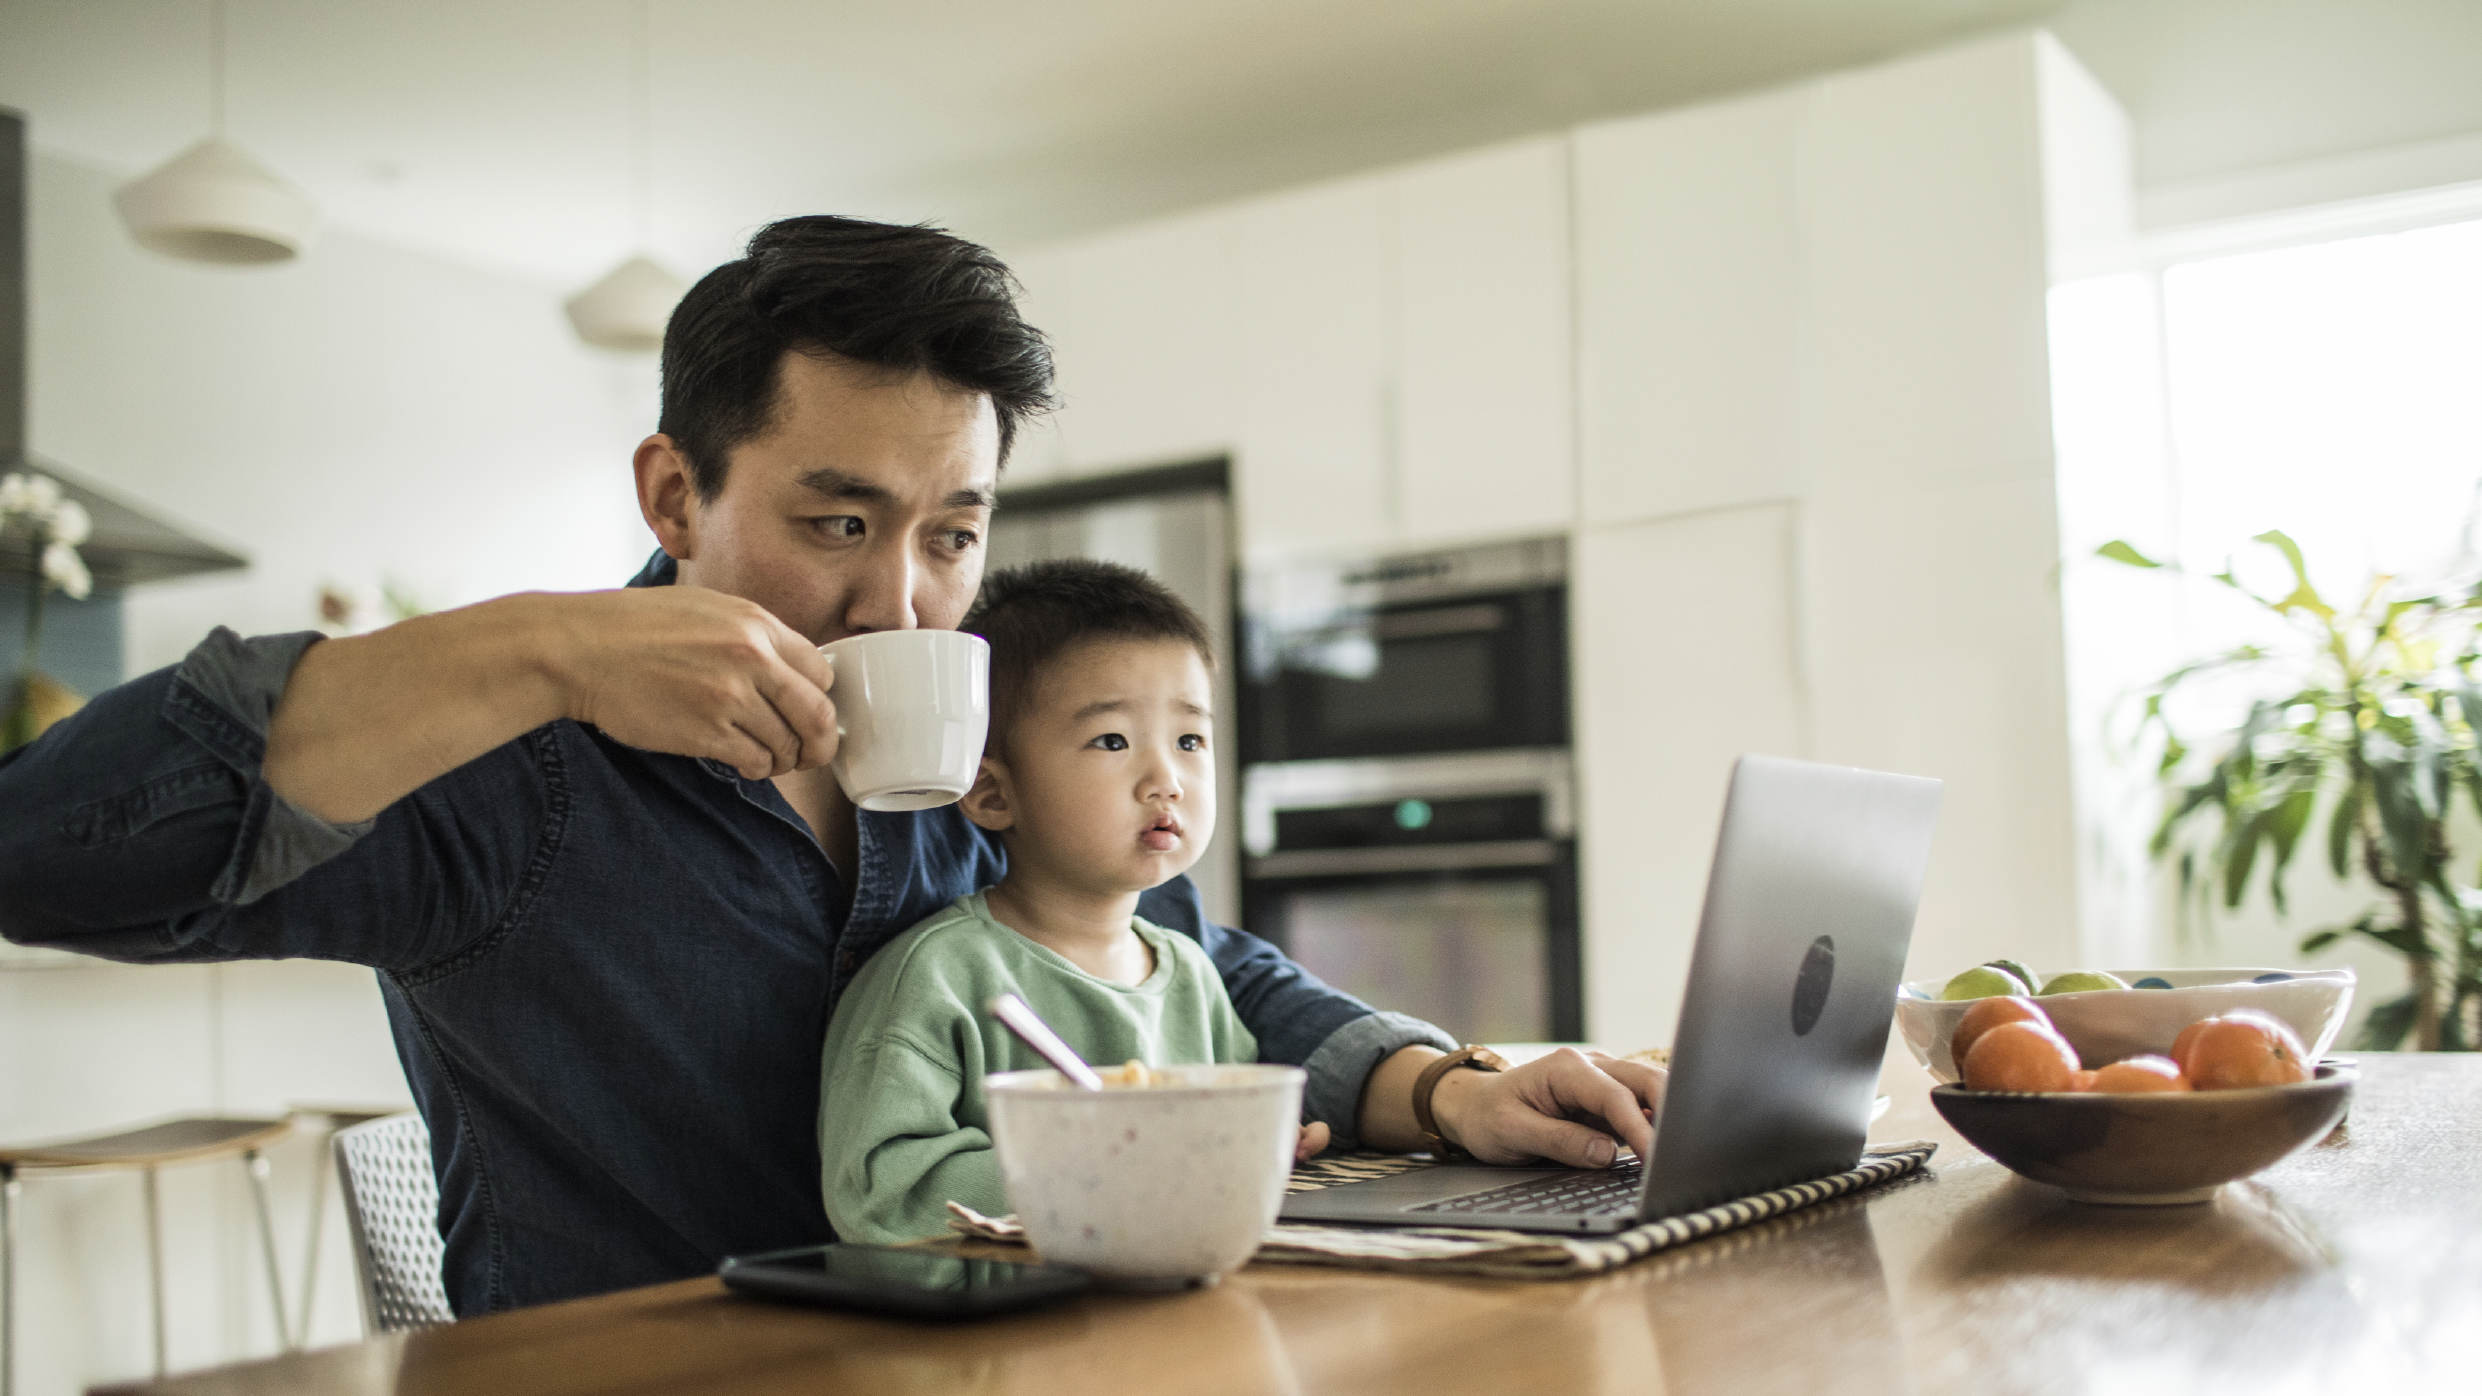 Father and son at kitchen table on laptop